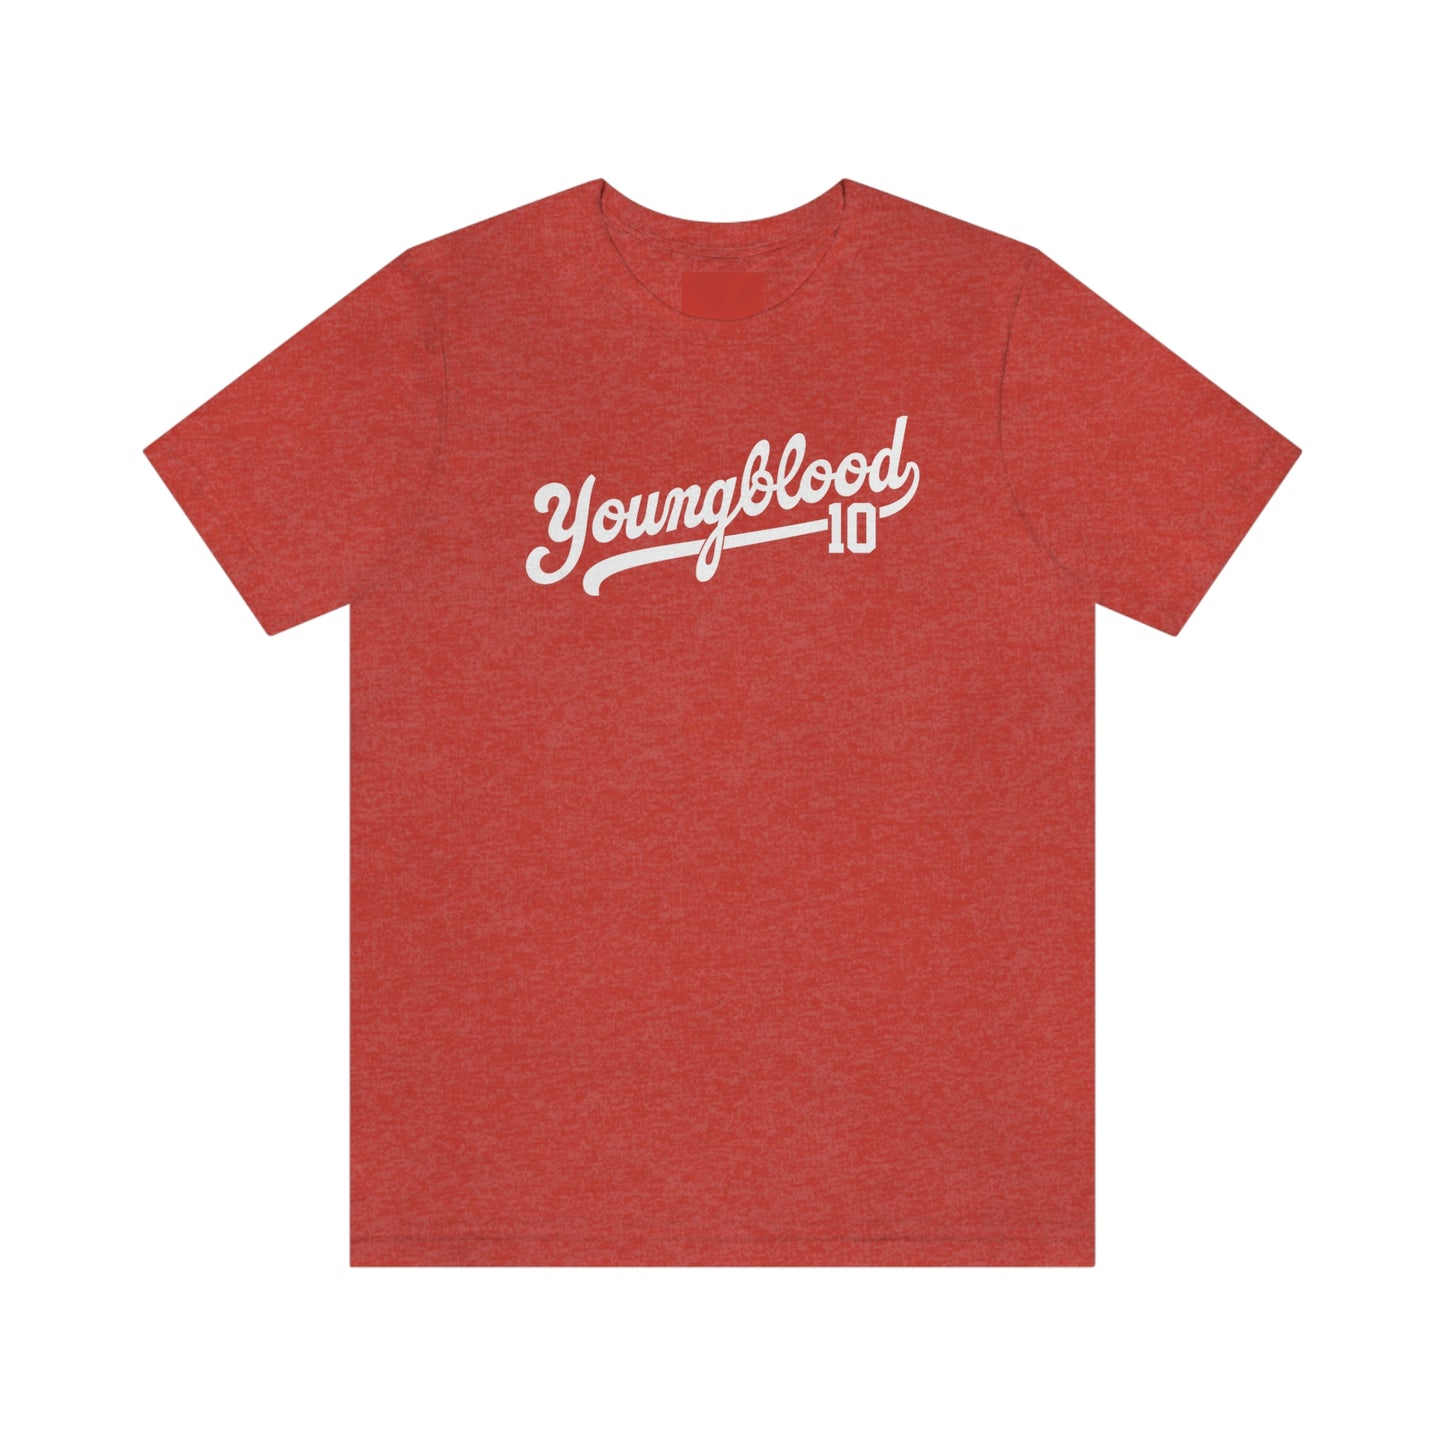 Youngblood - Youngblood 10 Tee